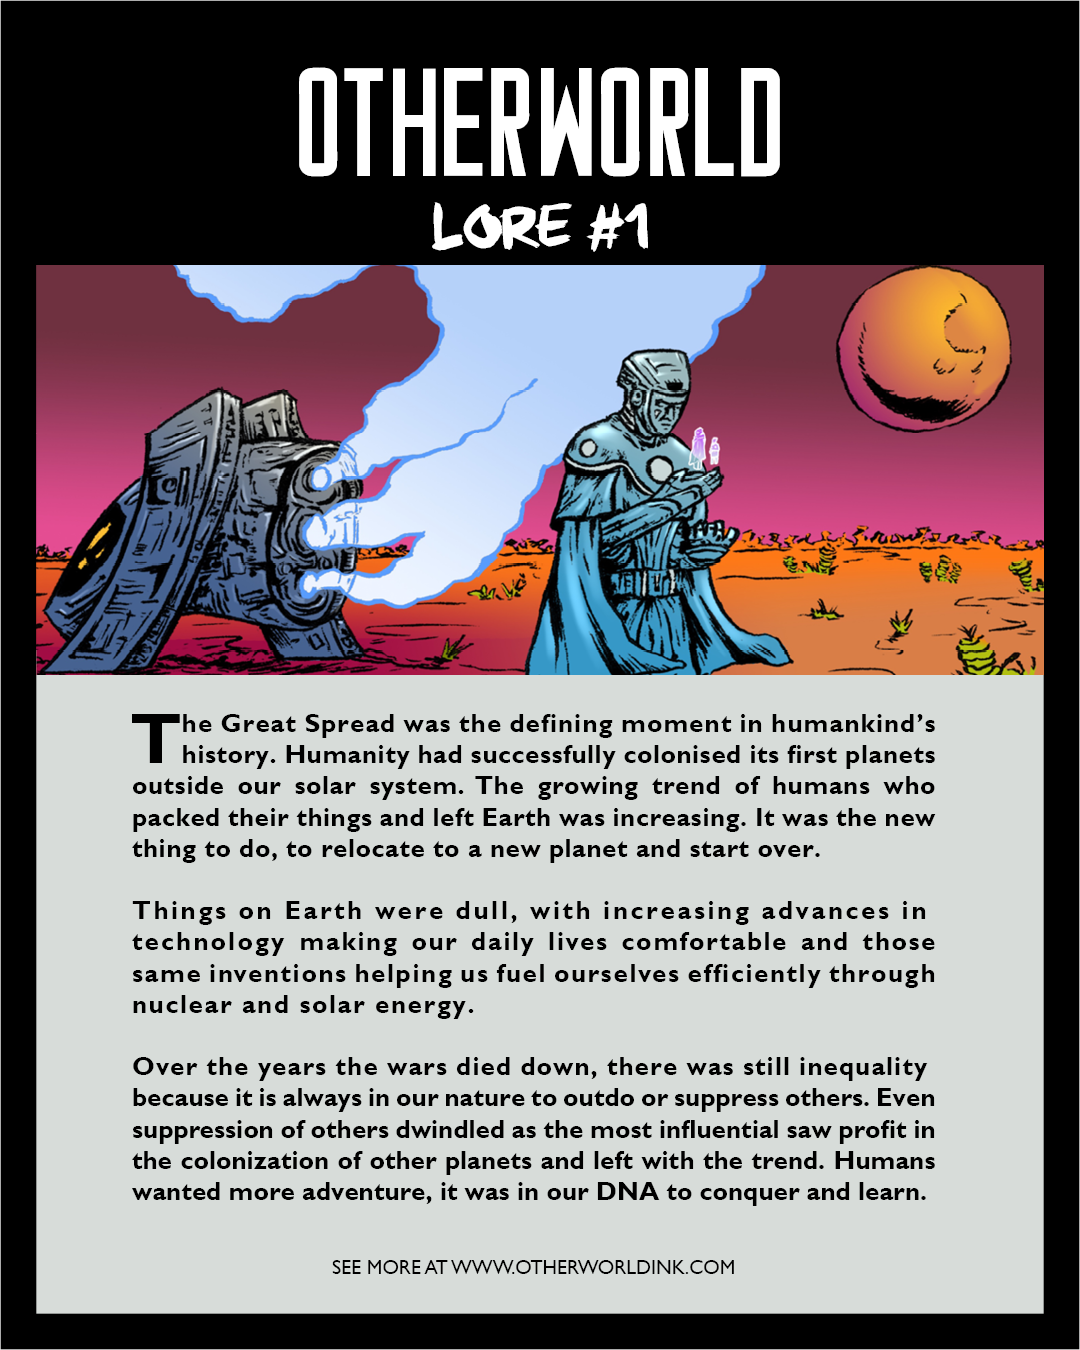 The Great spread - Otherworld Lore #1